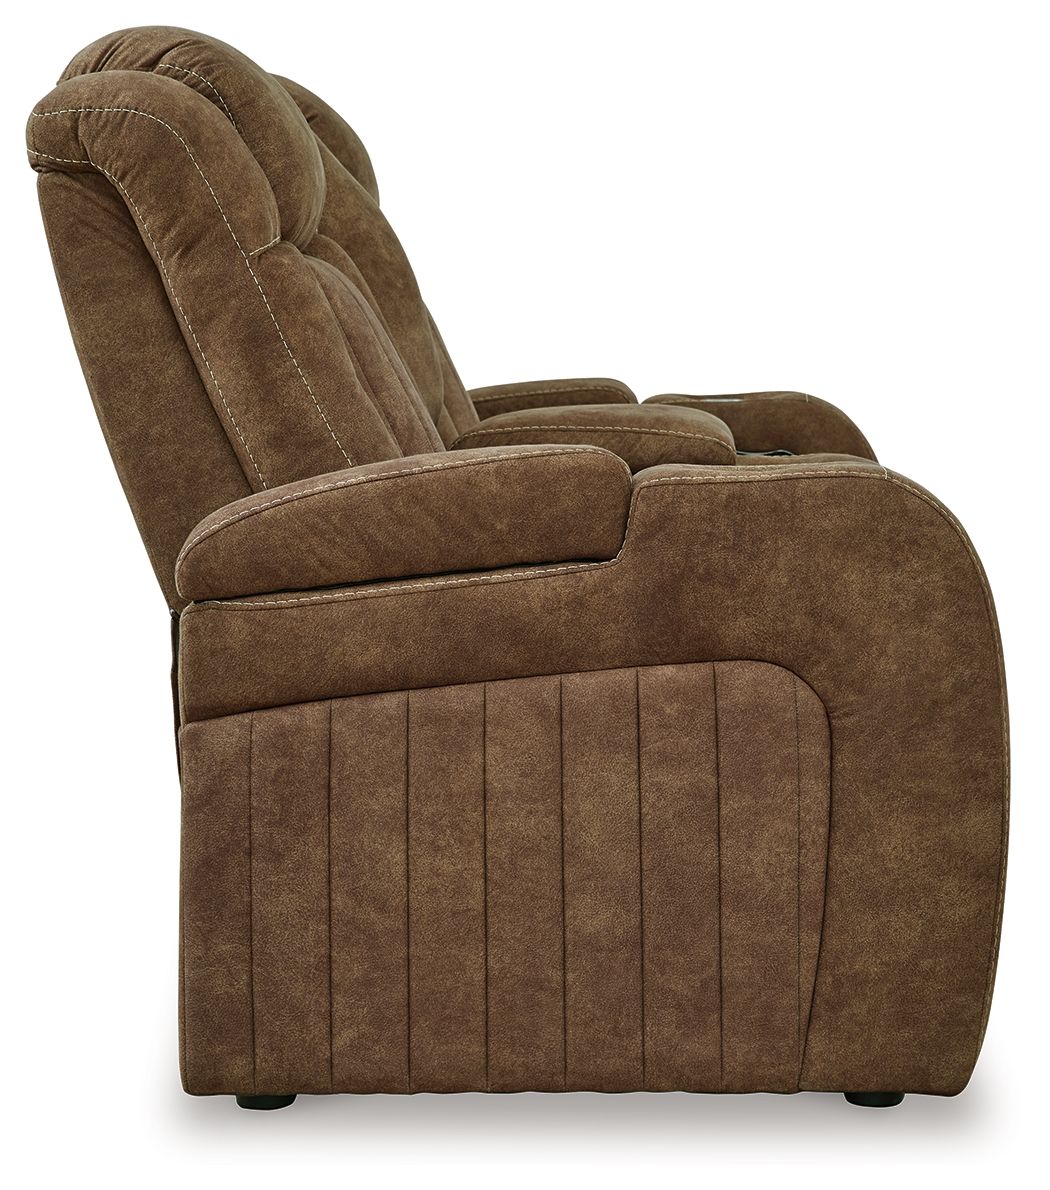 Wolfridge - Brindle - 2 Pc. - Power Reclining Sofa, Power Reclining Loveseat With Console - Tony's Home Furnishings